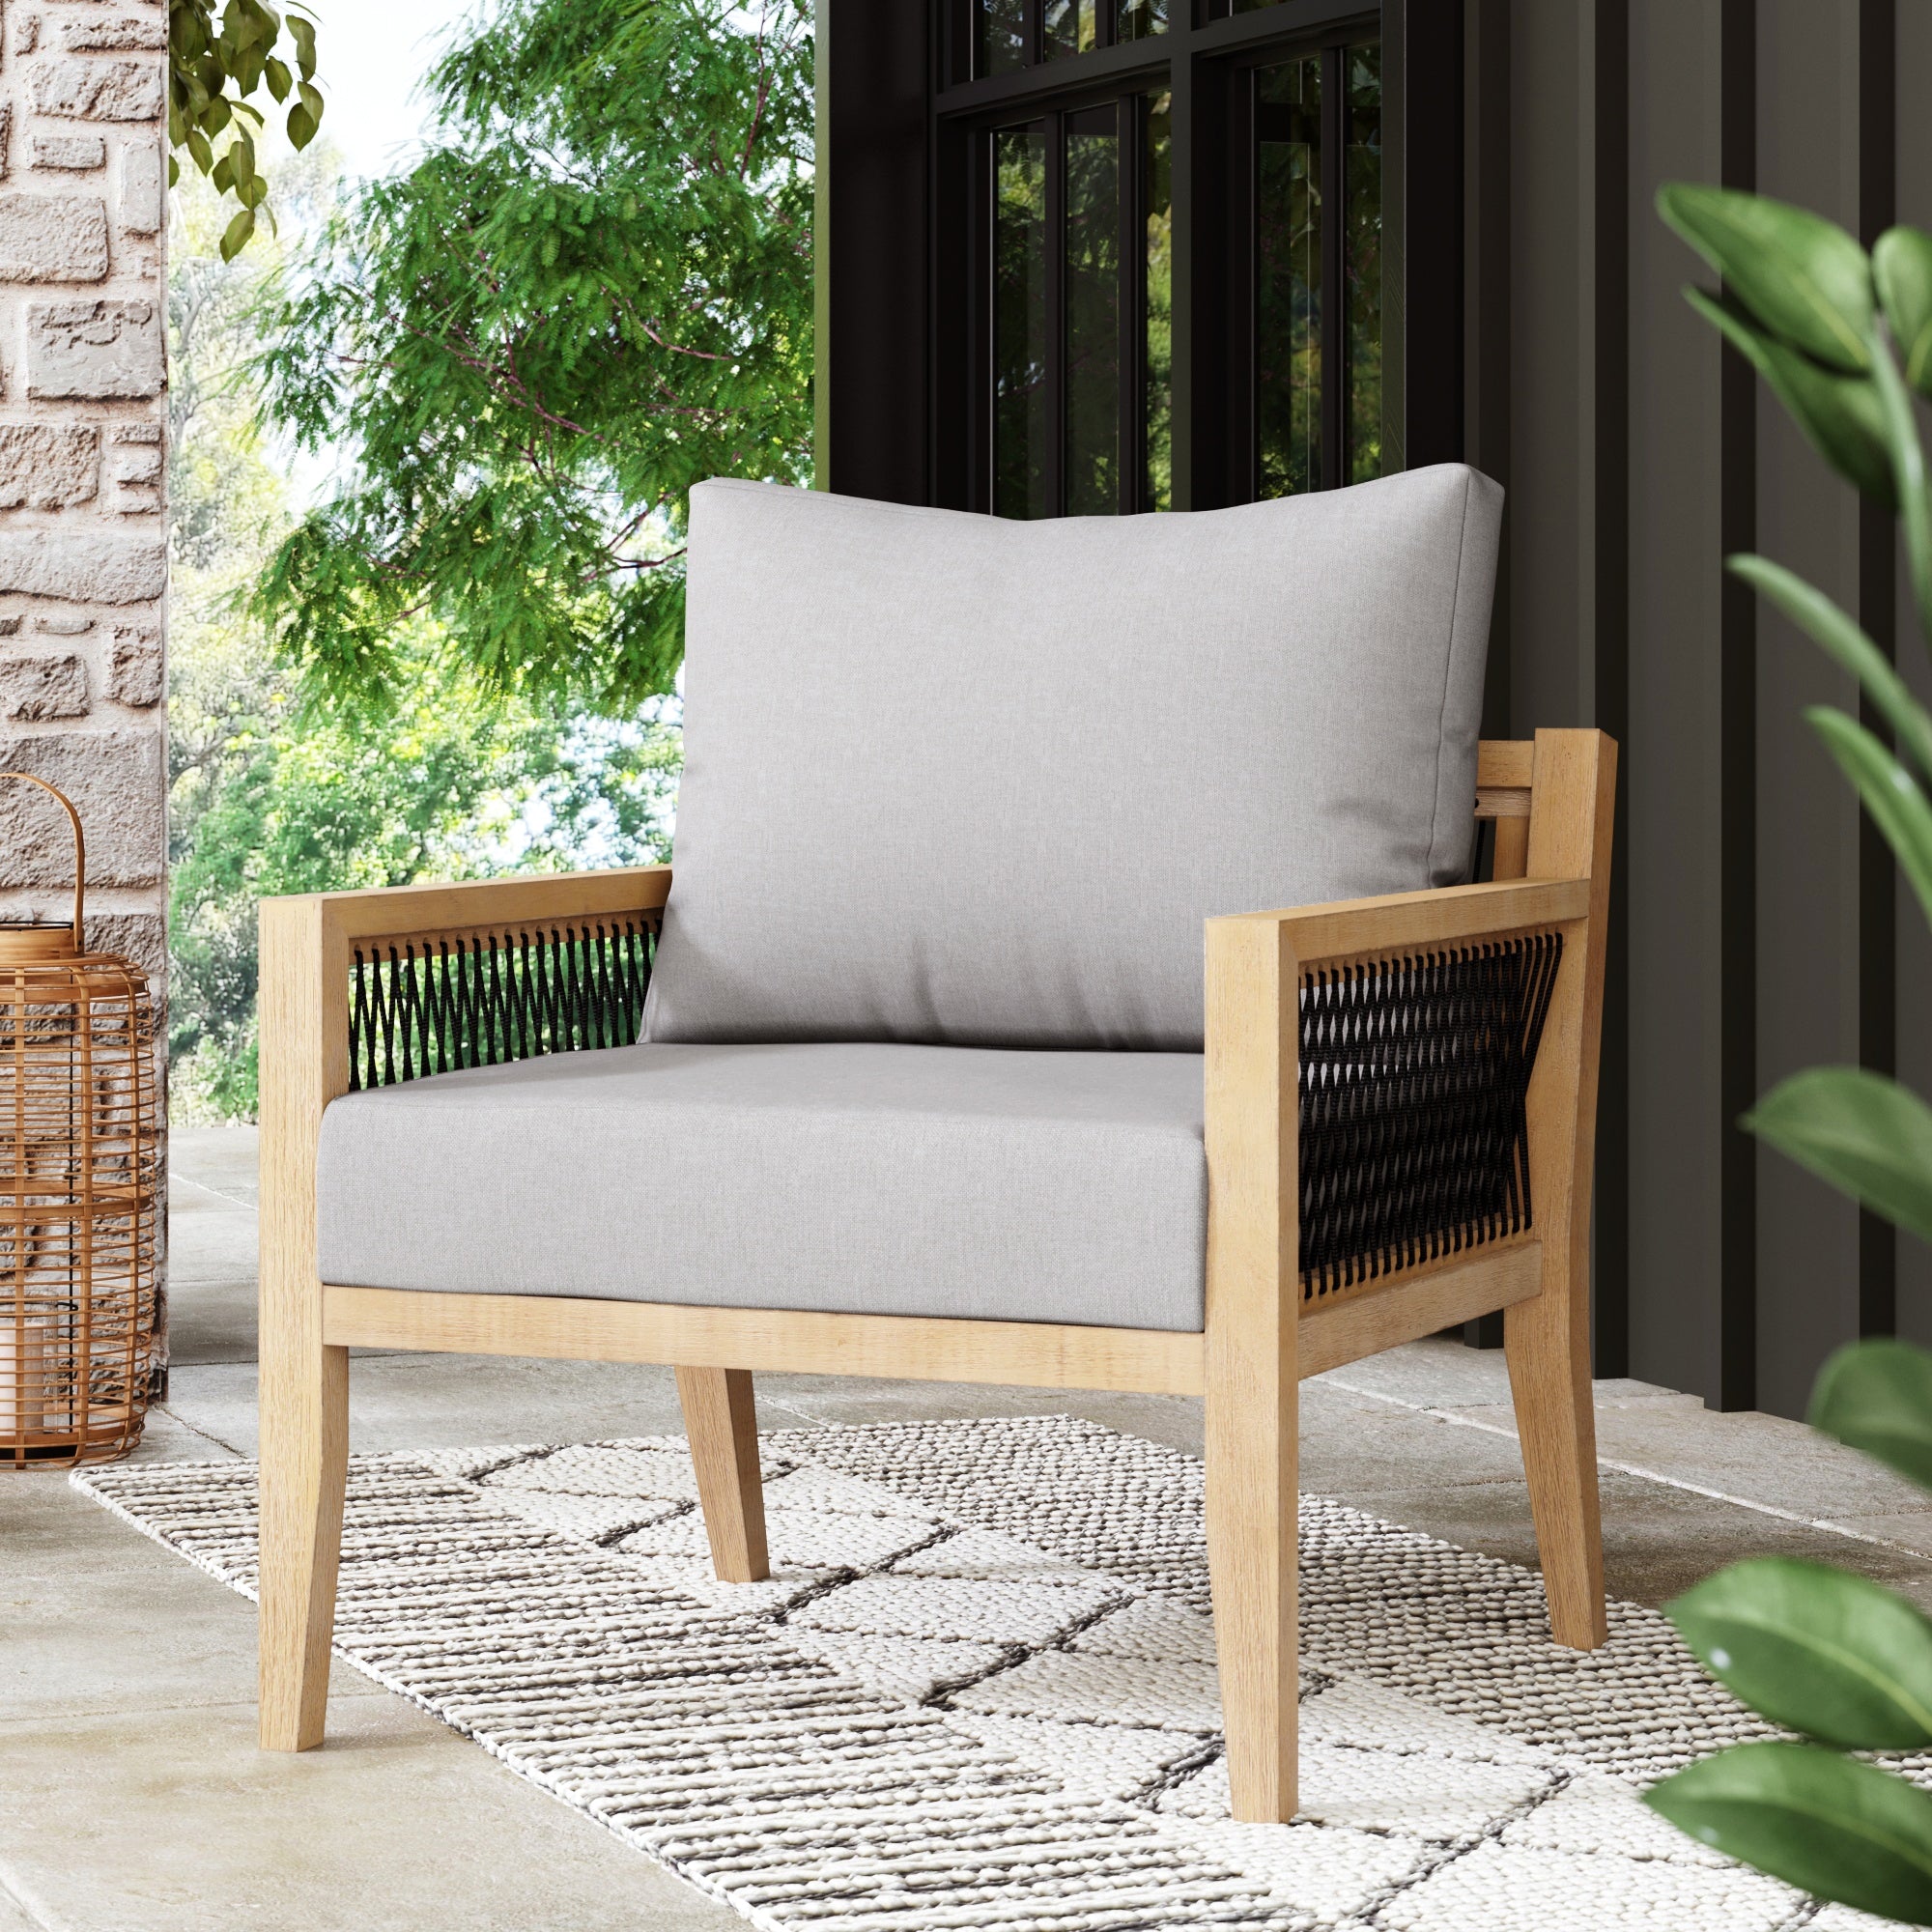 Set of 4 Outdoor Wood Cushioned Patio Chairs